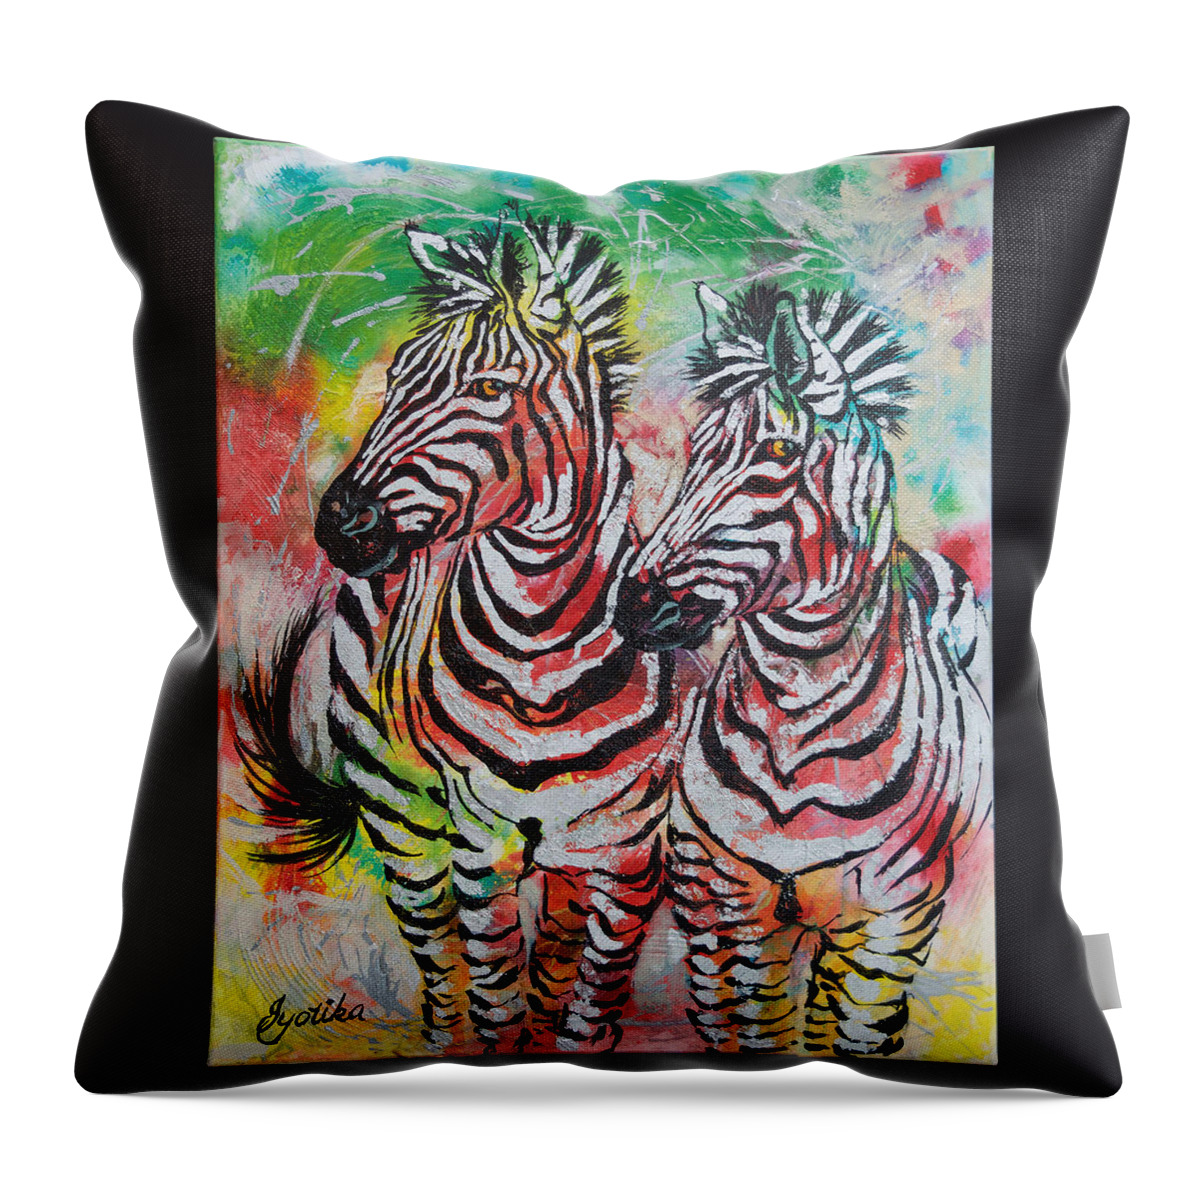 Zebras Throw Pillow featuring the painting Companion by Jyotika Shroff